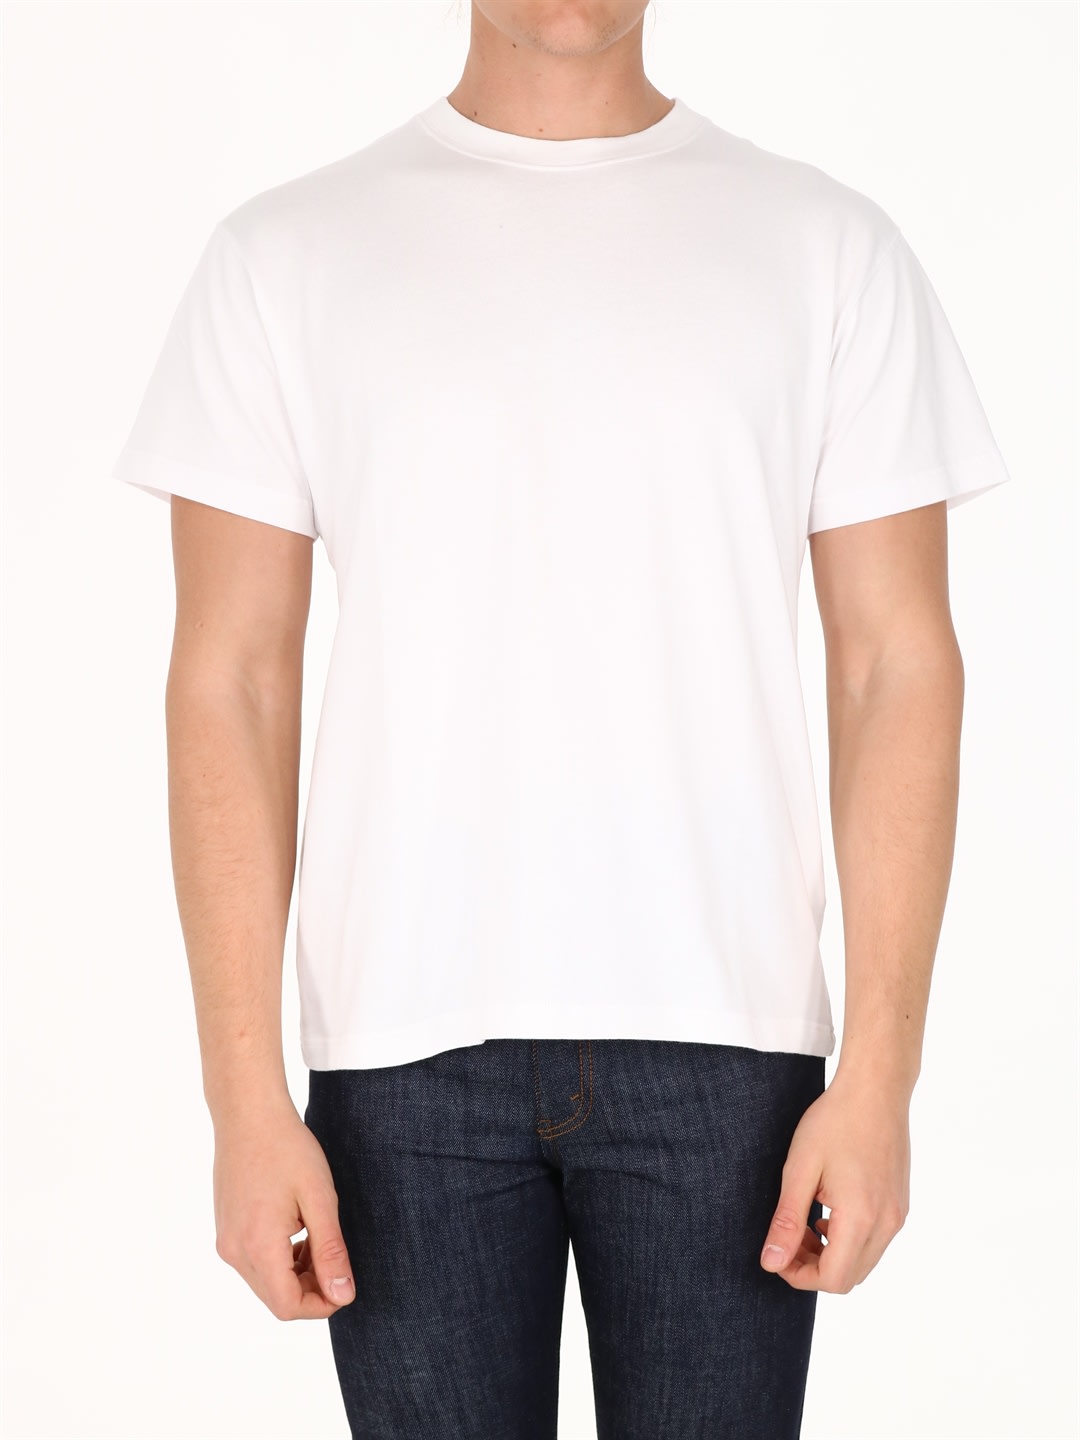 A-COLD-WALL Printed T-shirt White